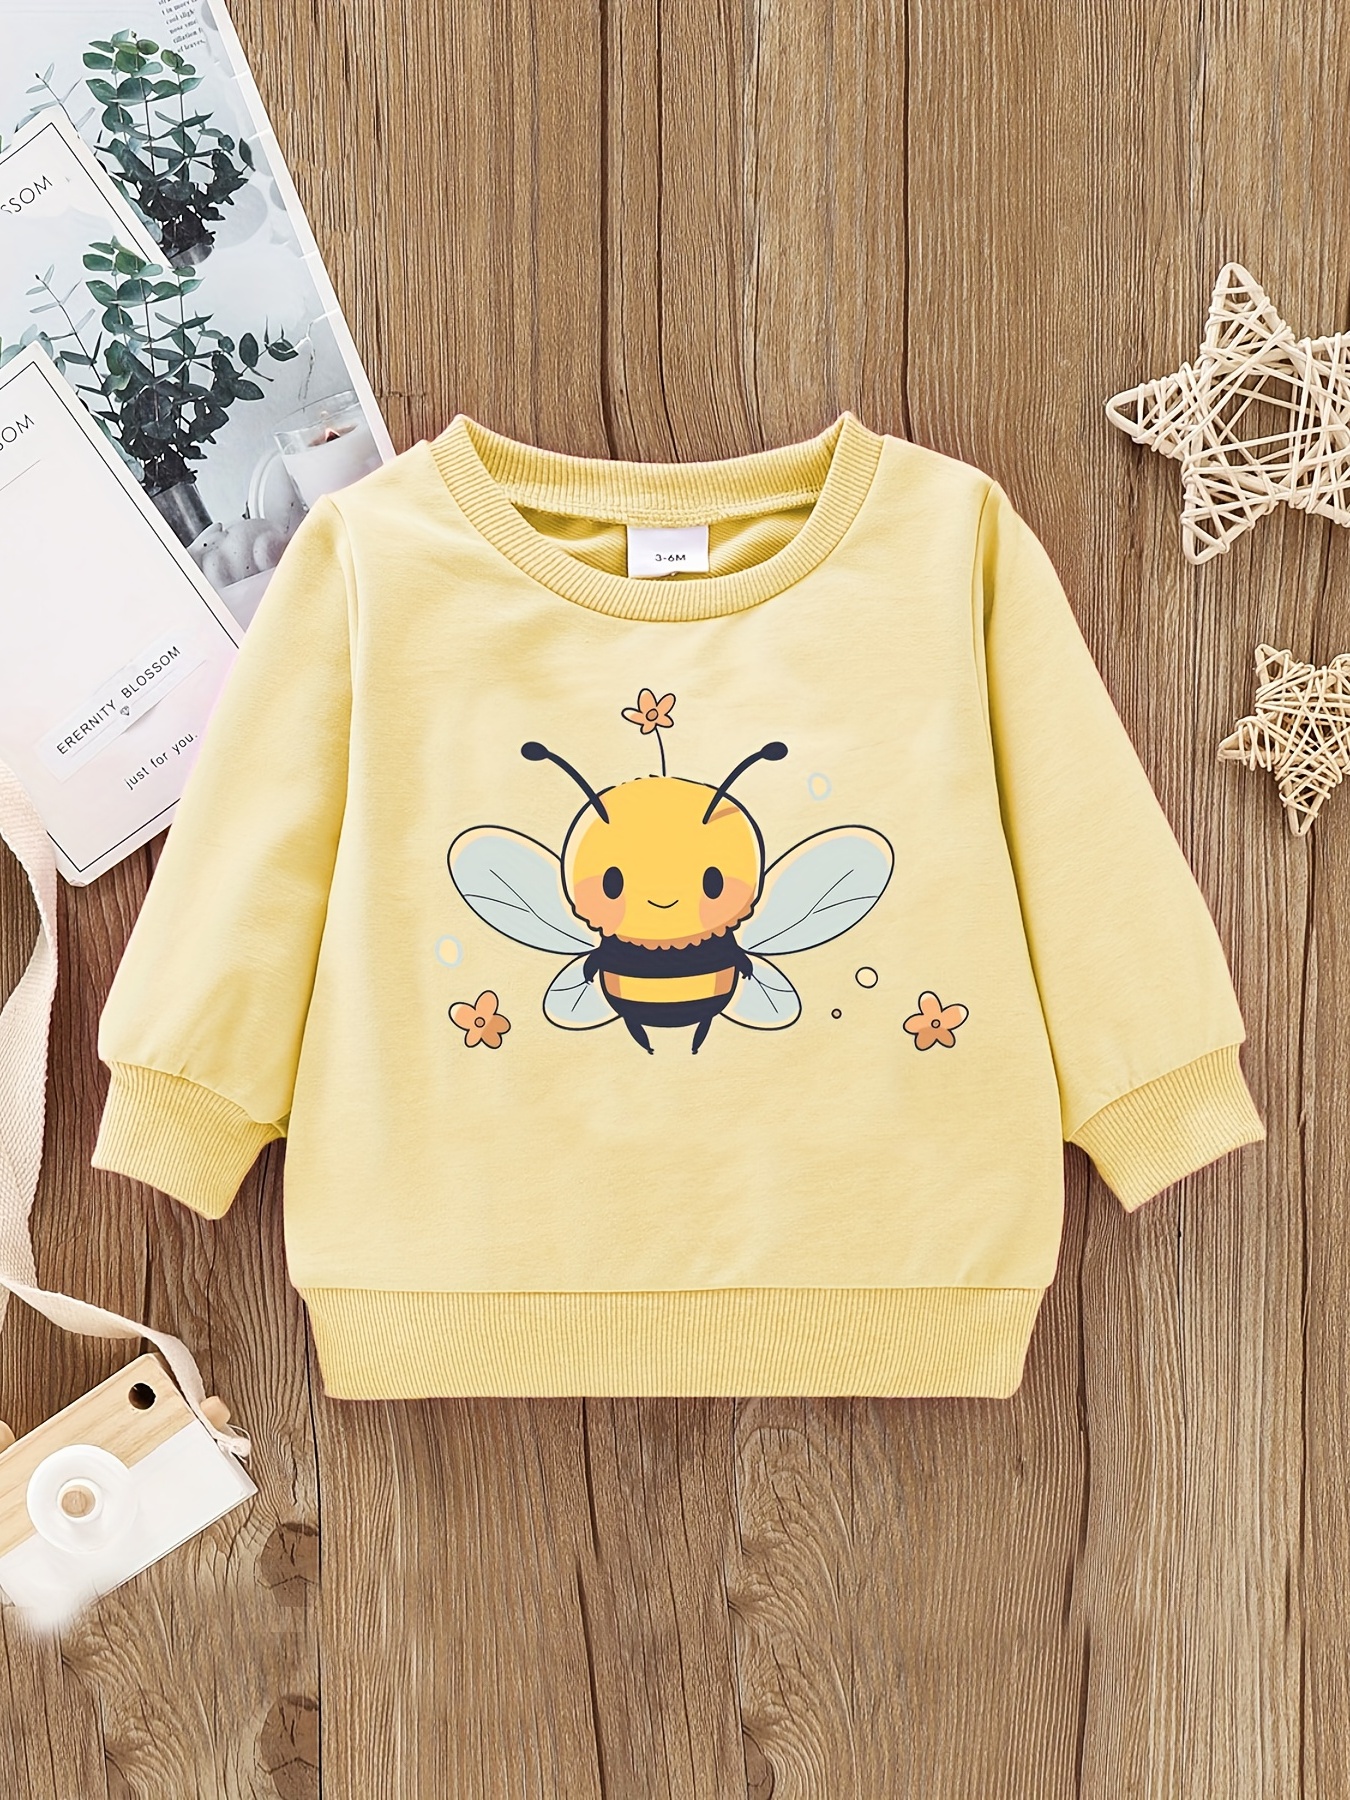 Best Kids Clothing on  2020: Cutest Clothes for Toddlers